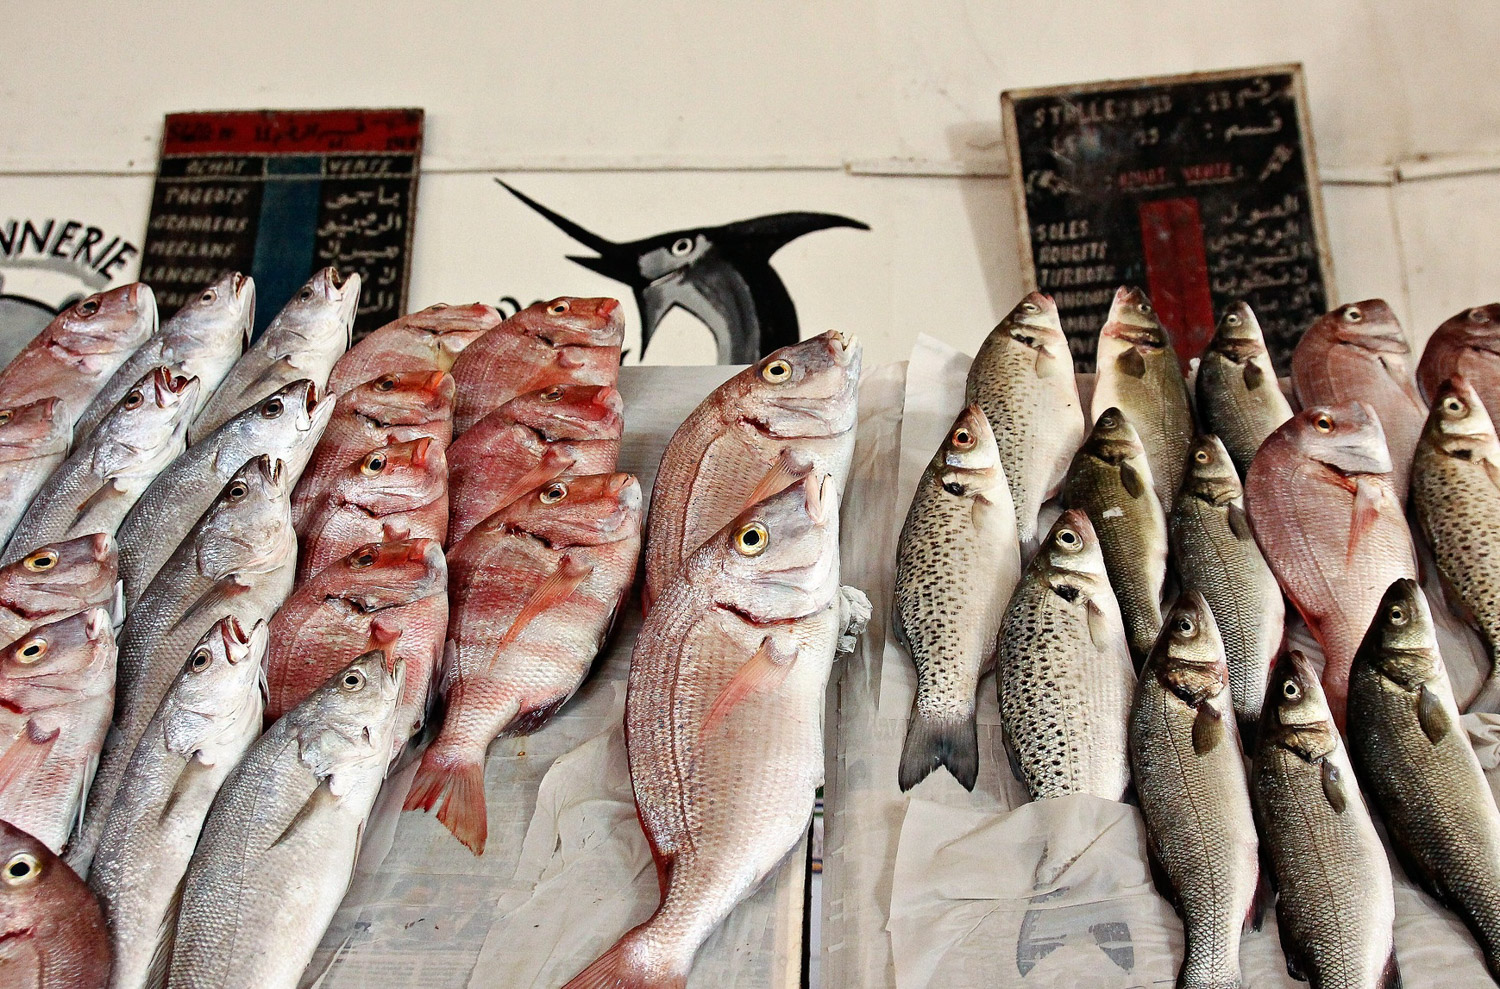 Casablanca fish by Magalie Abbe on Flickr